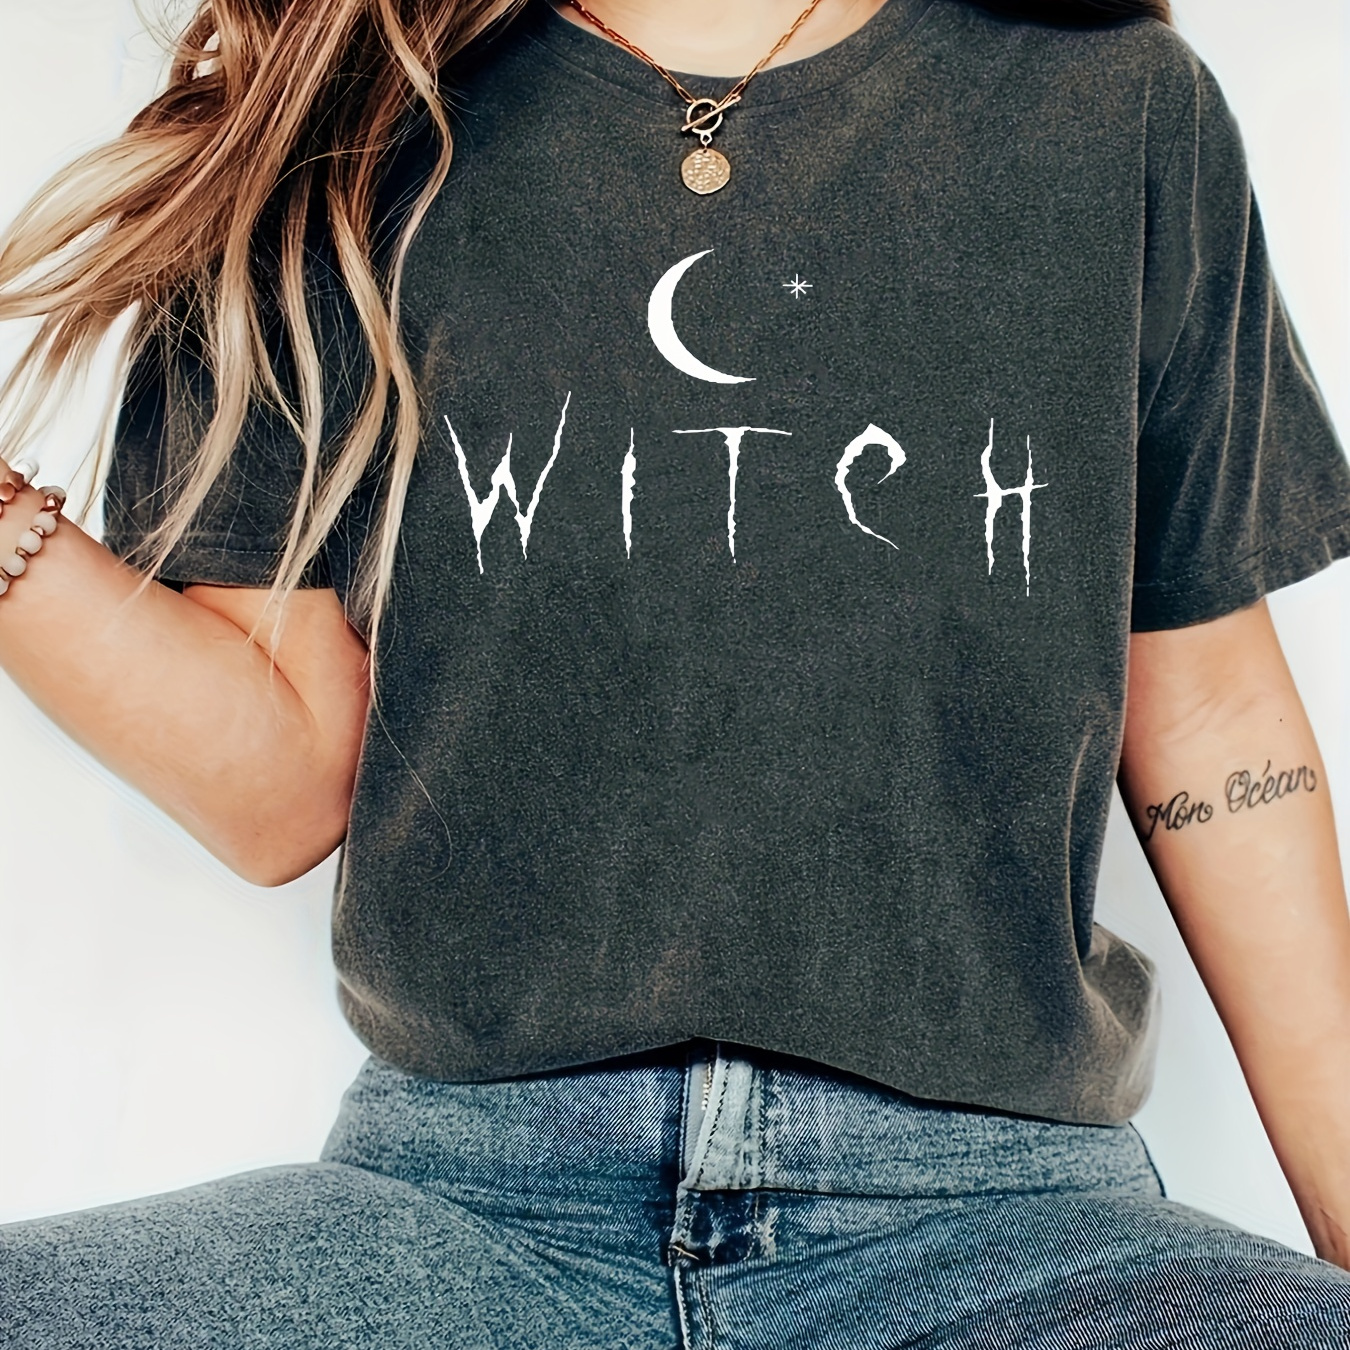 

Witch Letter Print T-shirt, Short Sleeve Crew Neck Casual Top For Summer & Spring, Women's Clothing